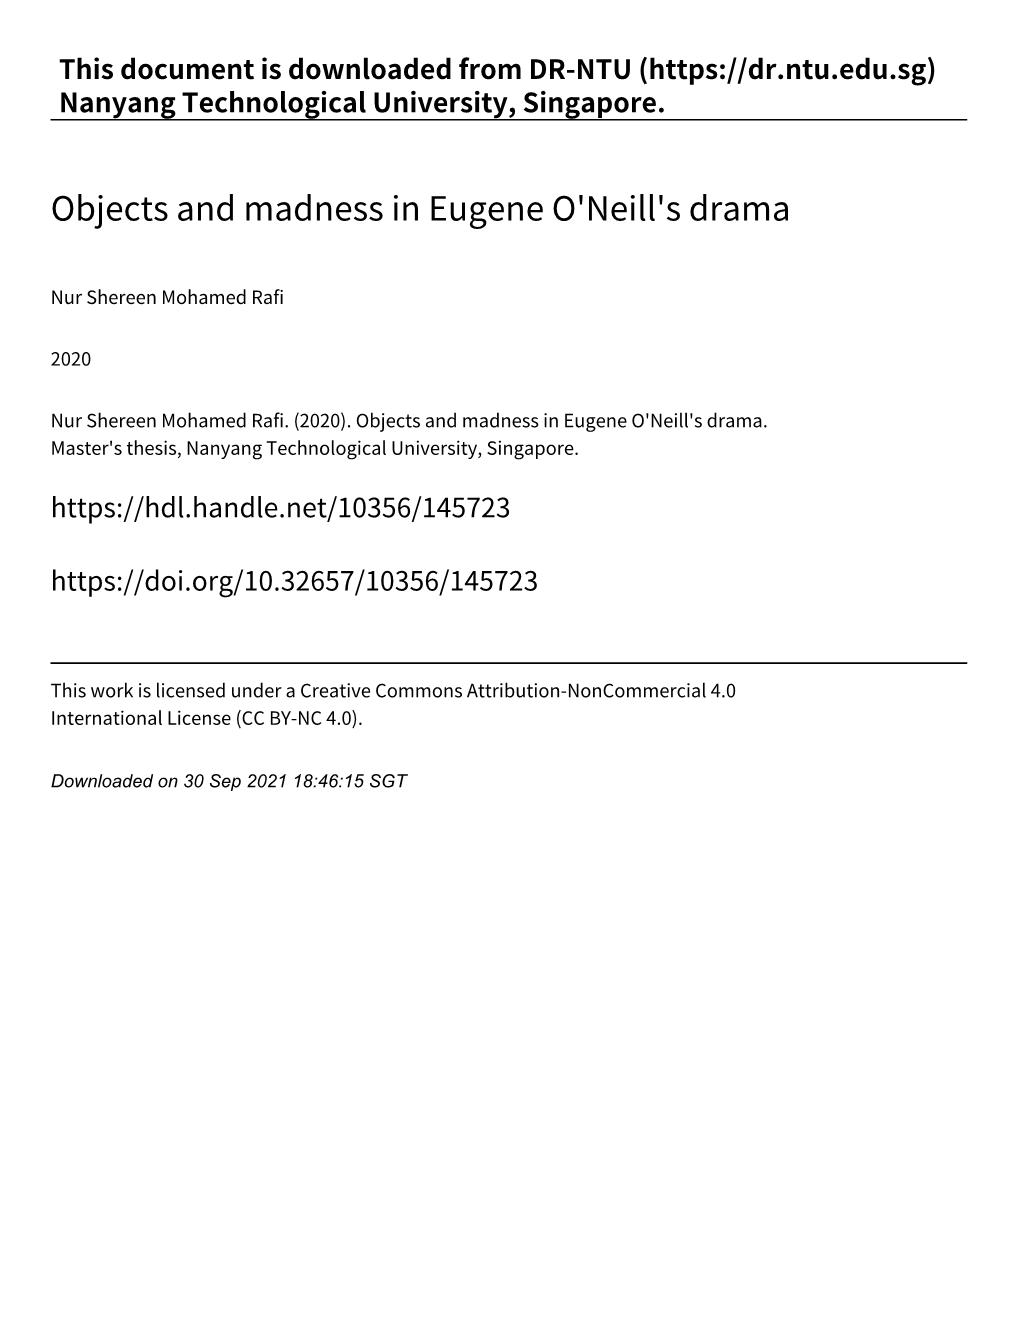 Objects and Madness in Eugene O'neill's Drama